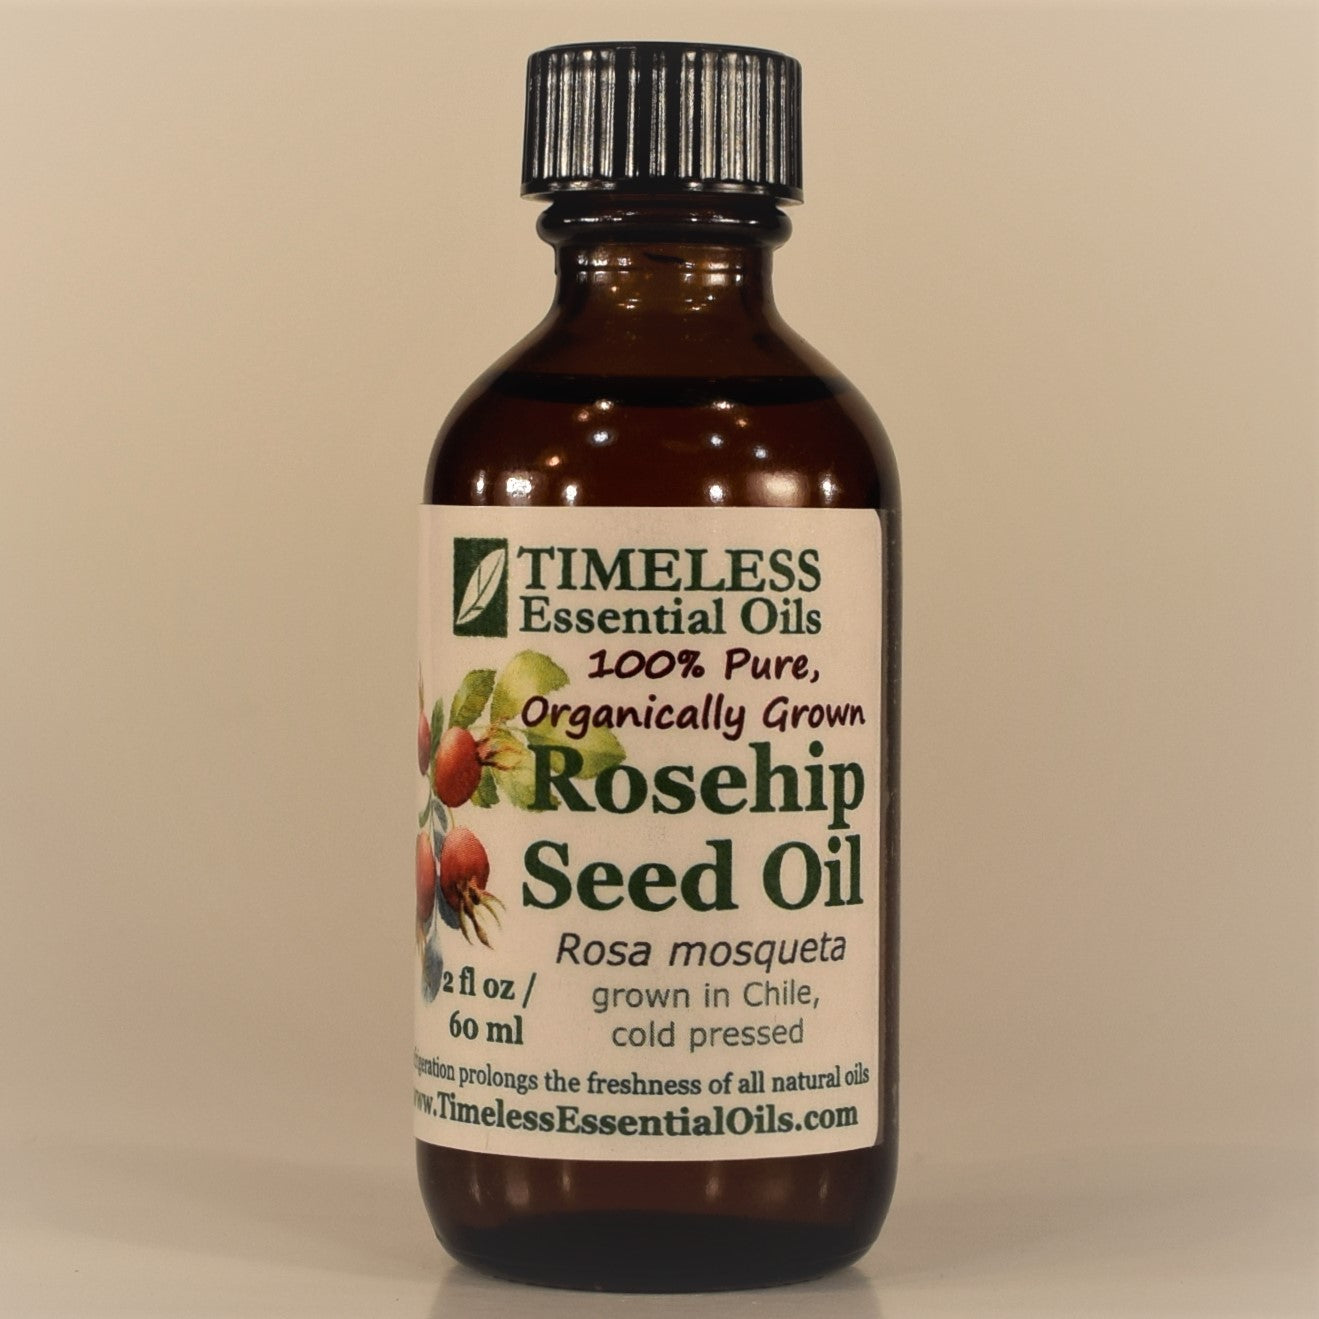 TIMELESS Organic Rosehip Seed Oil is antioxidant, emollient and regenerative.  Promotes healthy scar formation and supports regeneration of damaged skin from a variety of causes.  Helps revitalize brittle nails and dry, damaged hair. 